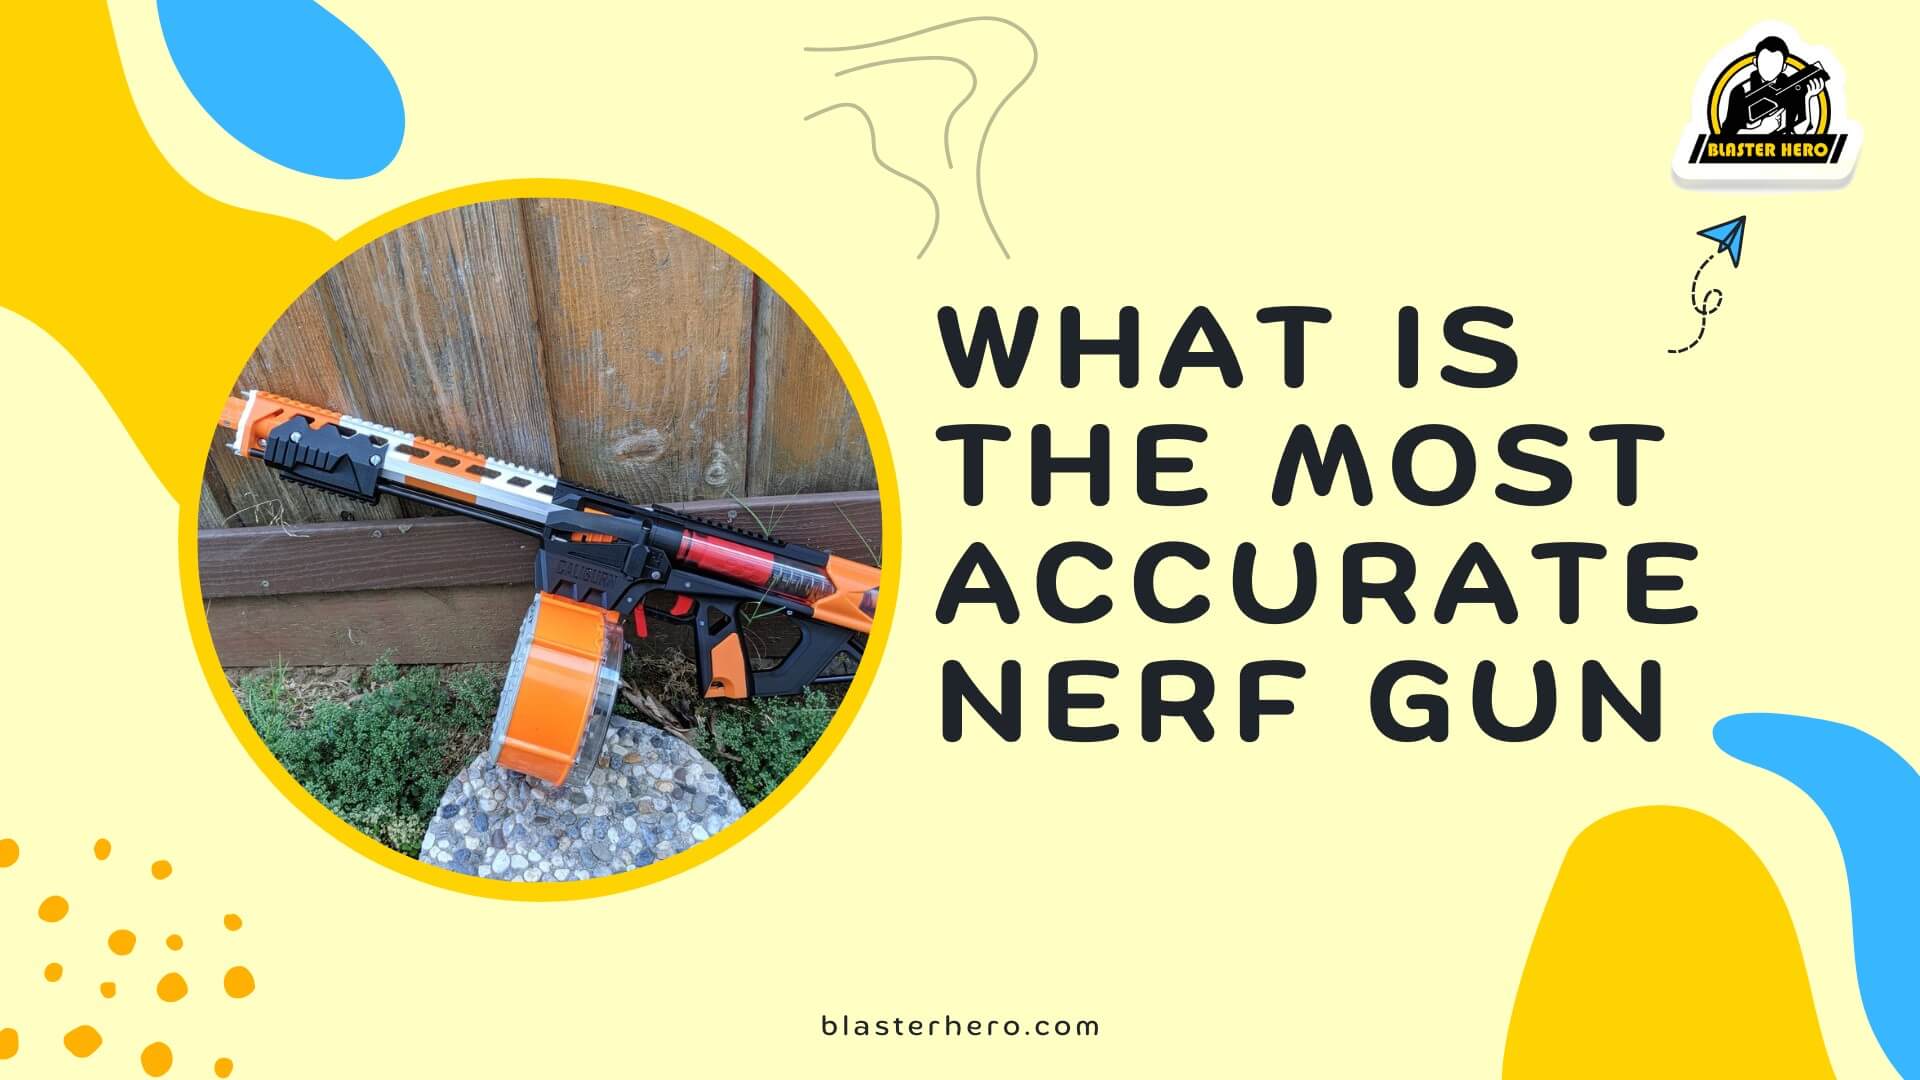 What is the most accurate nerf gun?